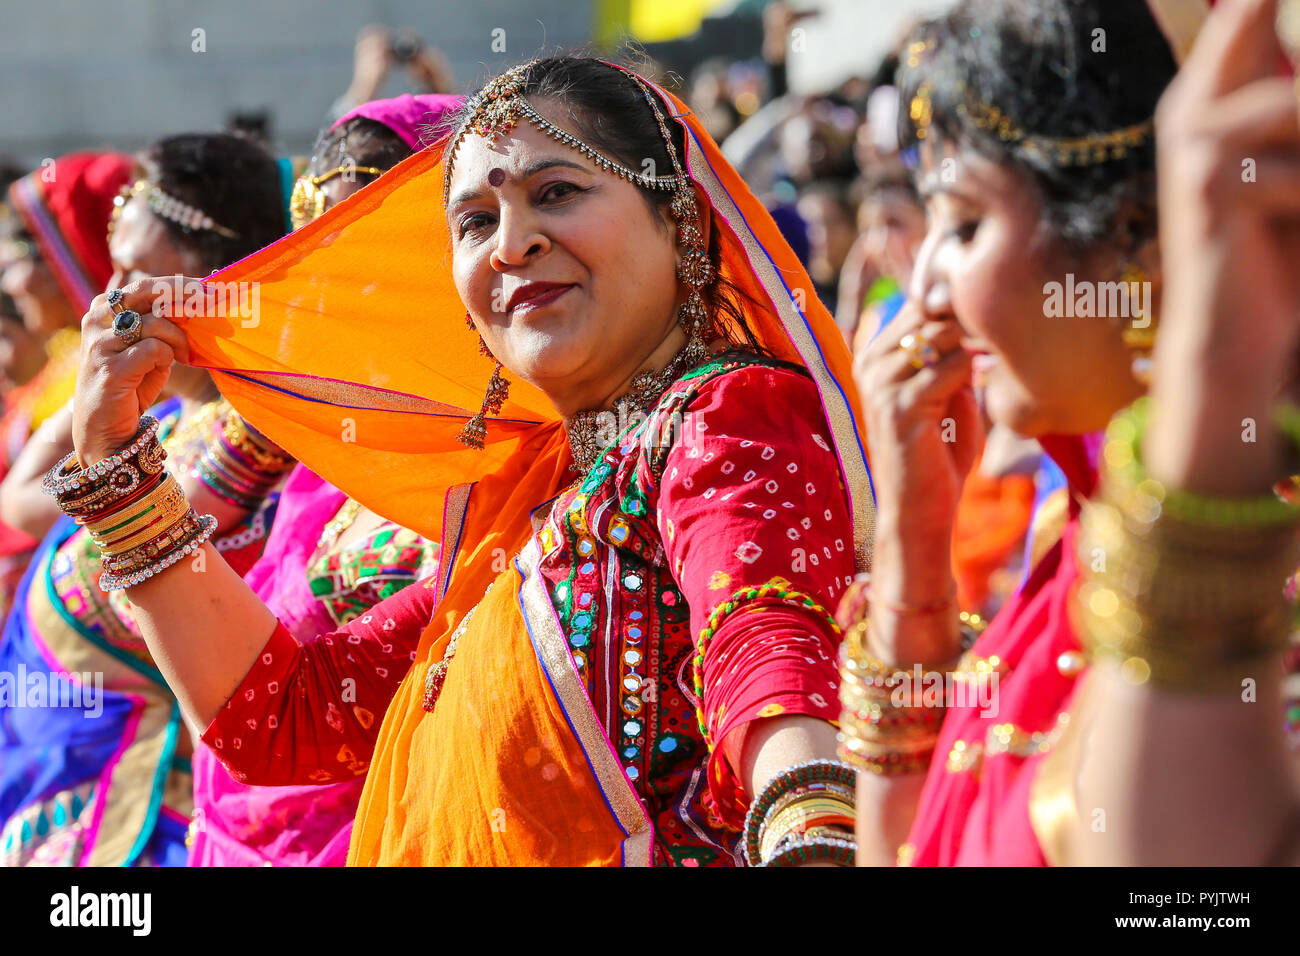 Trafalgar Square, London, UK. 28 Oct 2018 - Performers during the Mass Ghoomar Dance - a traditional Gujarati folk dance of the Bhil tribe performed in worship to Goddess Sarasvati, were the dancers twirling in and out of a wide circle.   Hundreds of Hindus, Sikhs, Jains and people from all communities attend Diwali celebrations in London - festival of light, Diwali in London is celebrated each year with a free concert of traditional religious and contemporary Asian music and dance.  Credit: Dinendra Haria/Alamy Live News Stock Photo